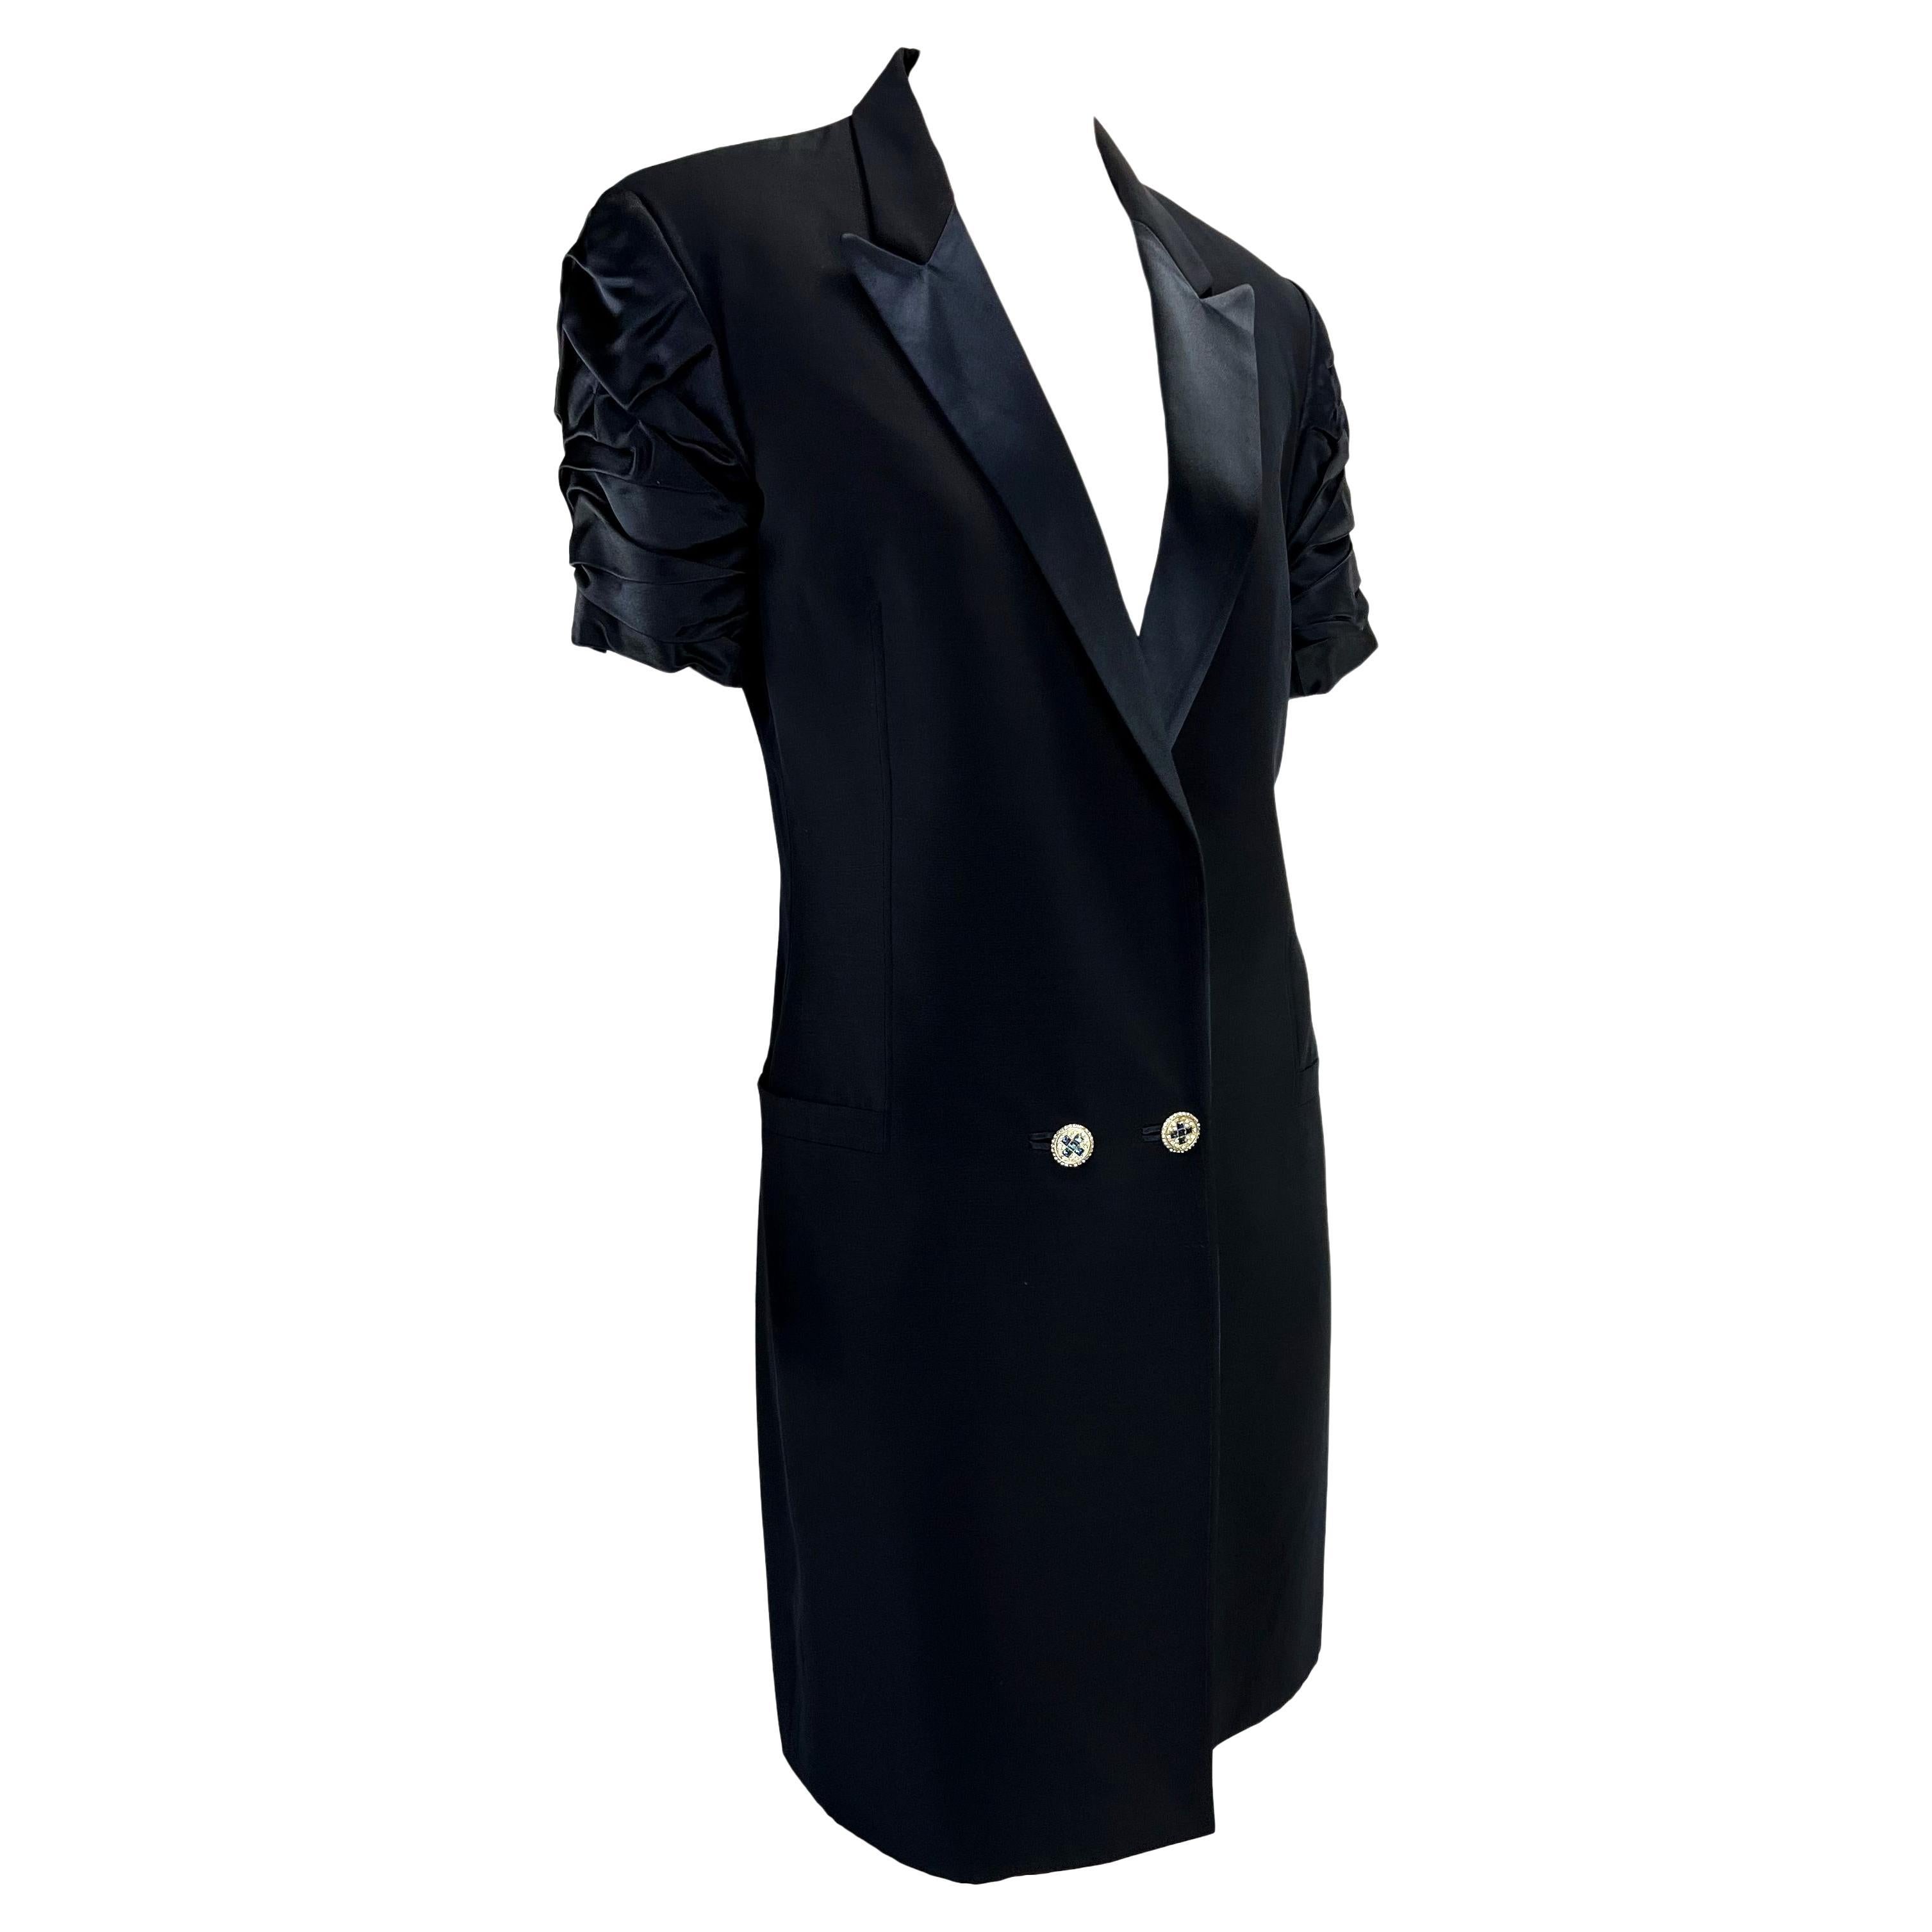 S/S 1990 Gianni Versace Couture Rhinestone Tuxedo Navy Ruched Blazer Dress In Excellent Condition For Sale In West Hollywood, CA